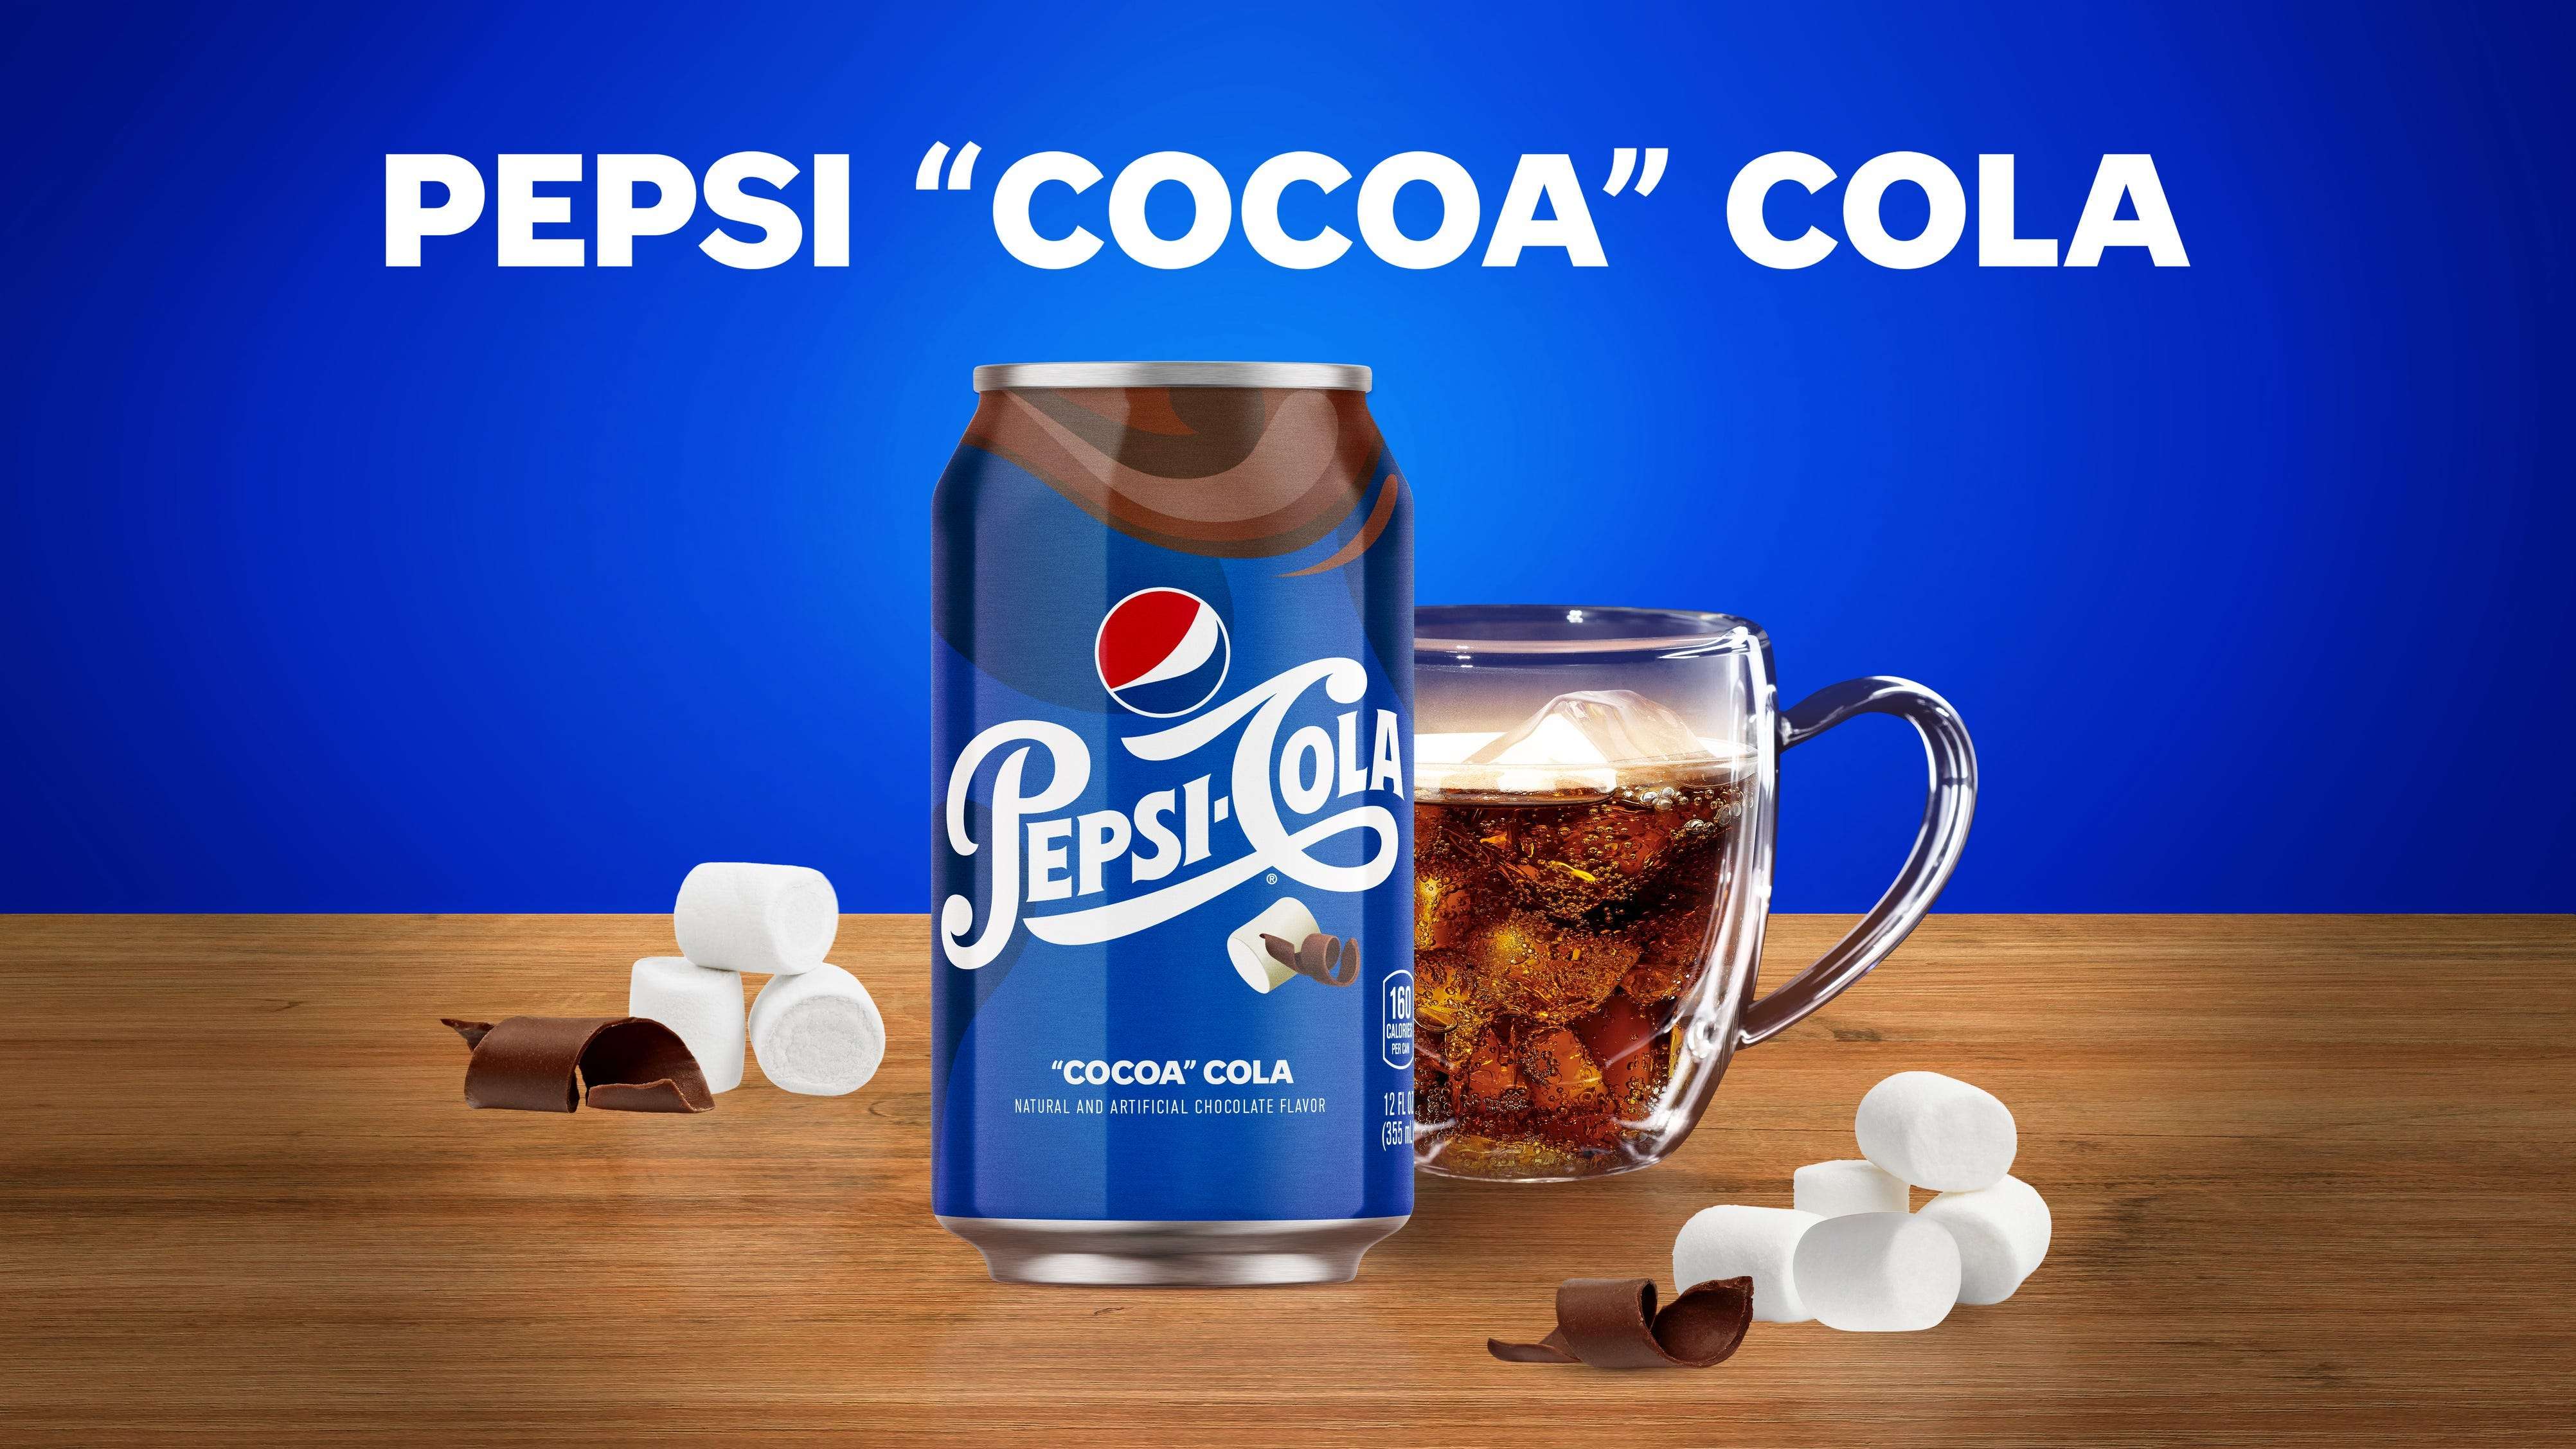 Pepsi is launching 'cocoa' cola, a drink made to taste like hot chocolate  with marshmallows